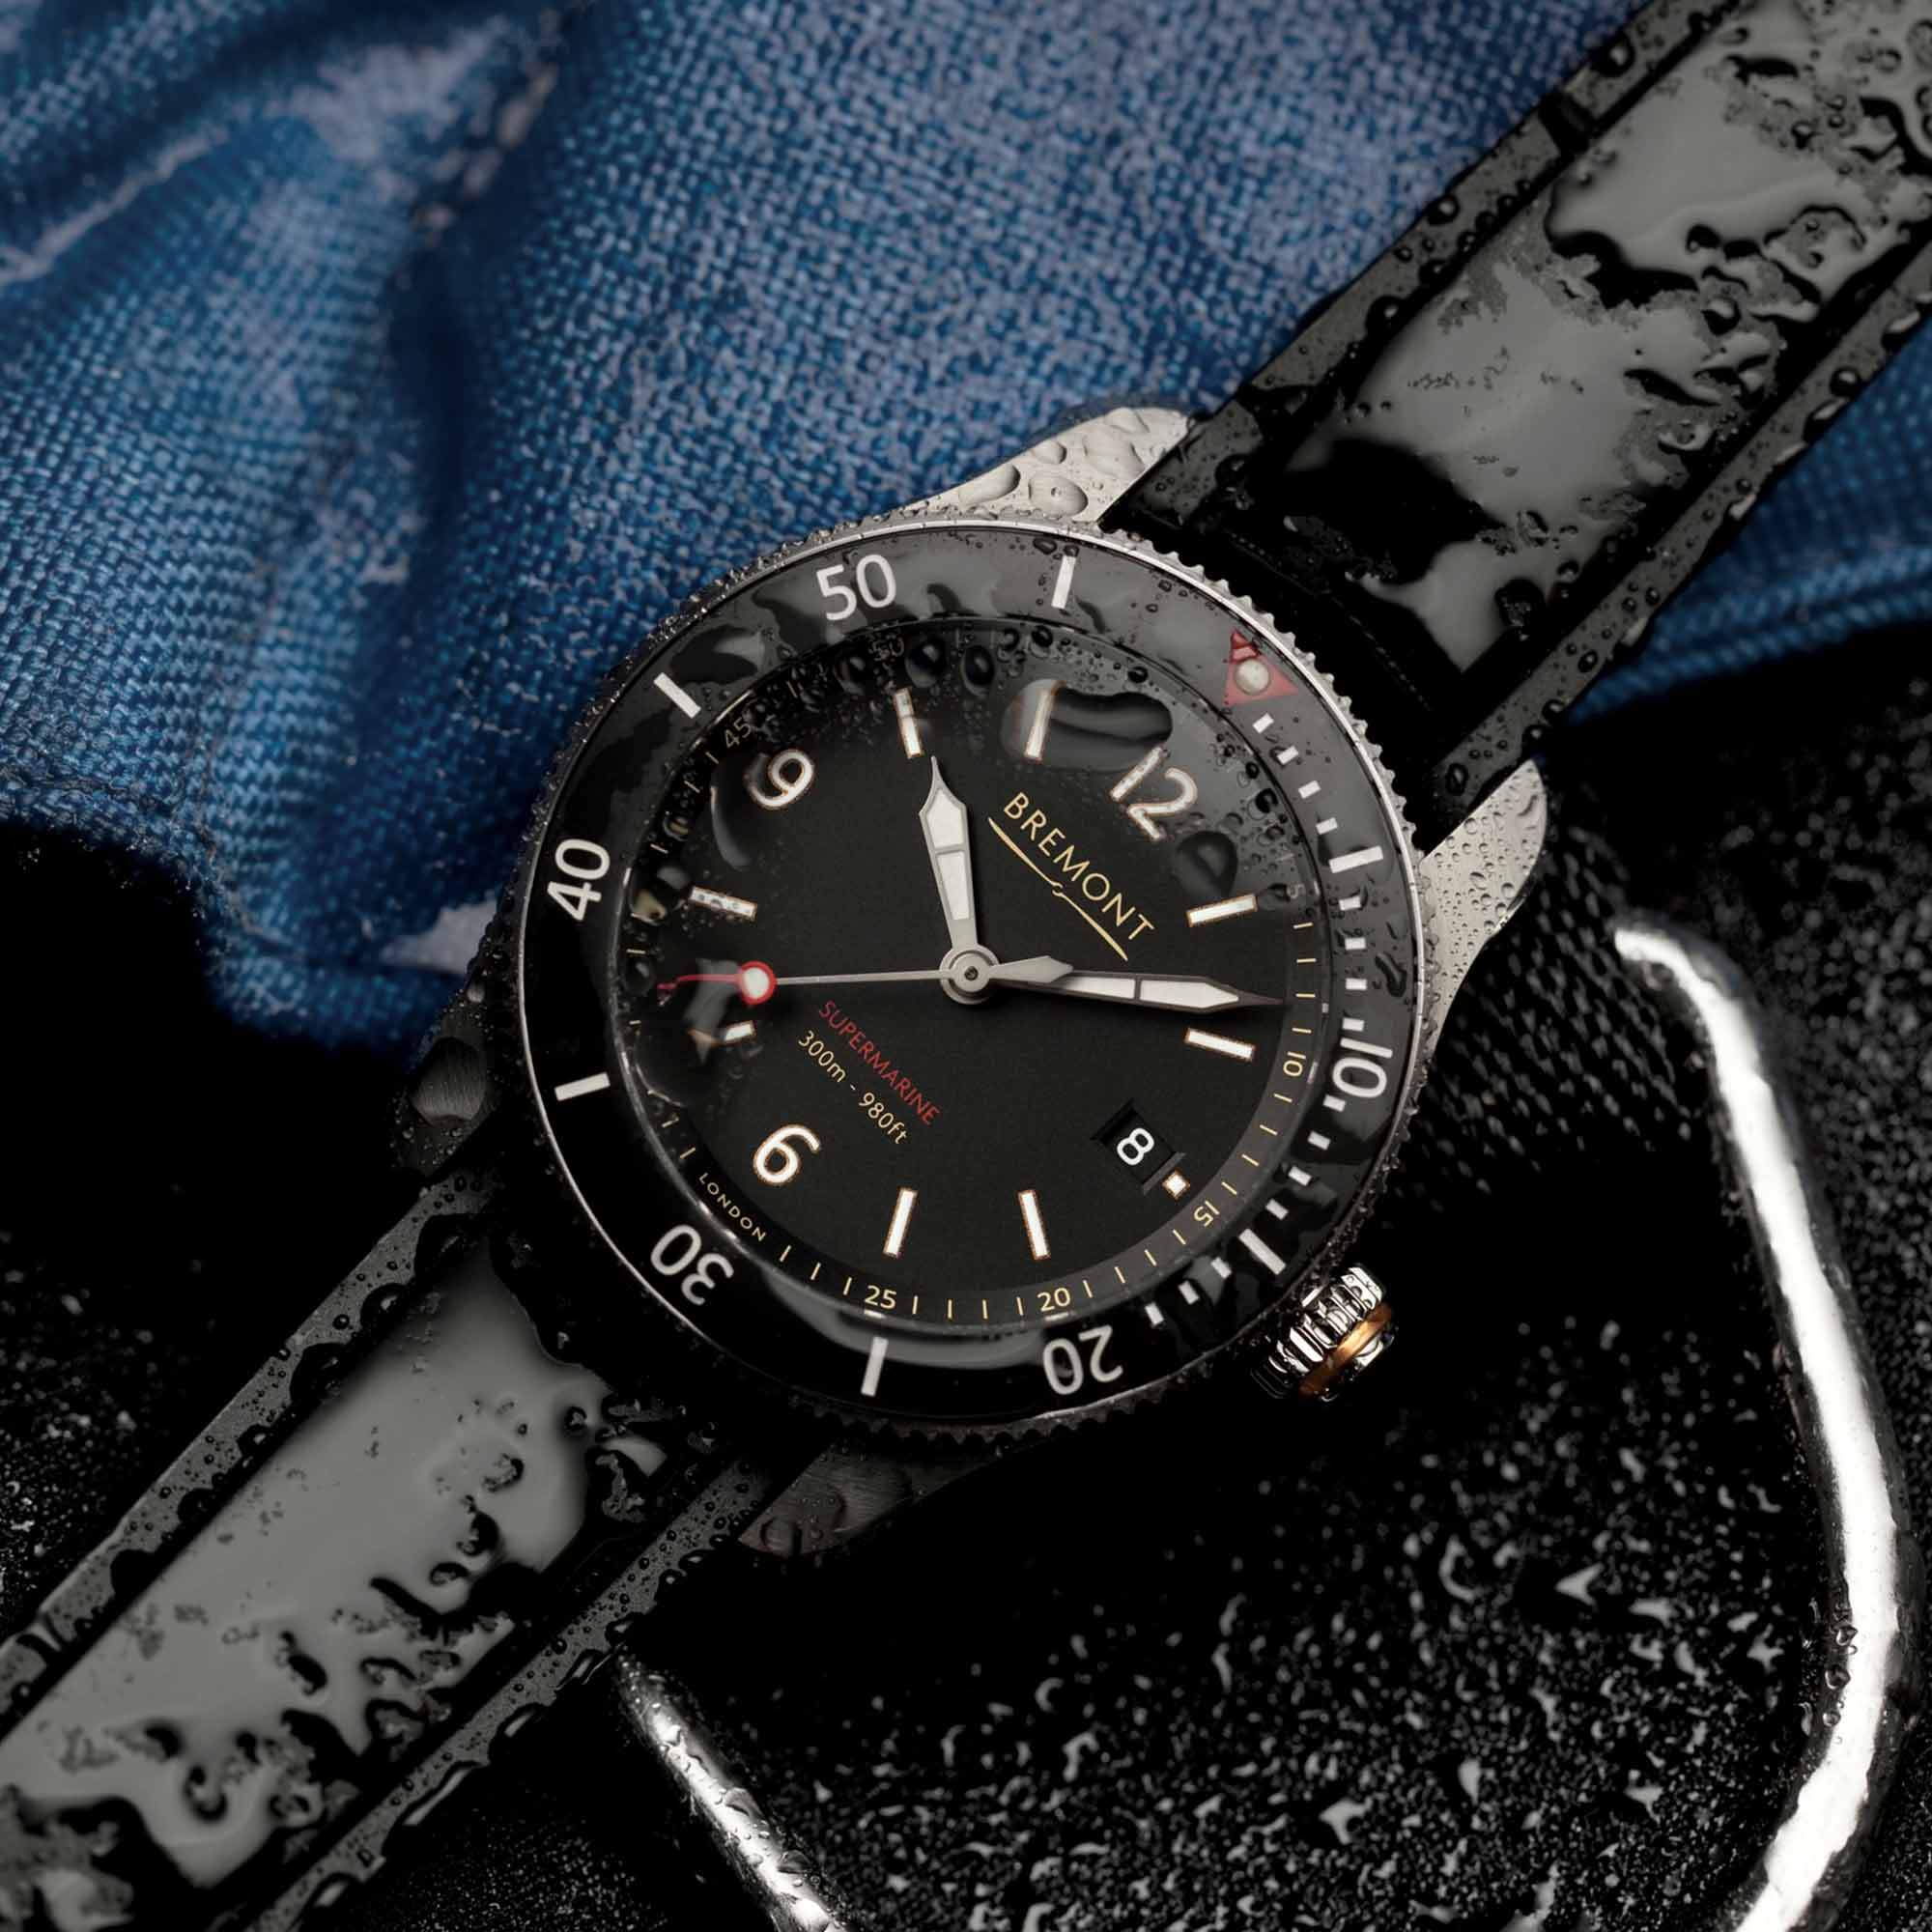 Bremont Dive Watch with water